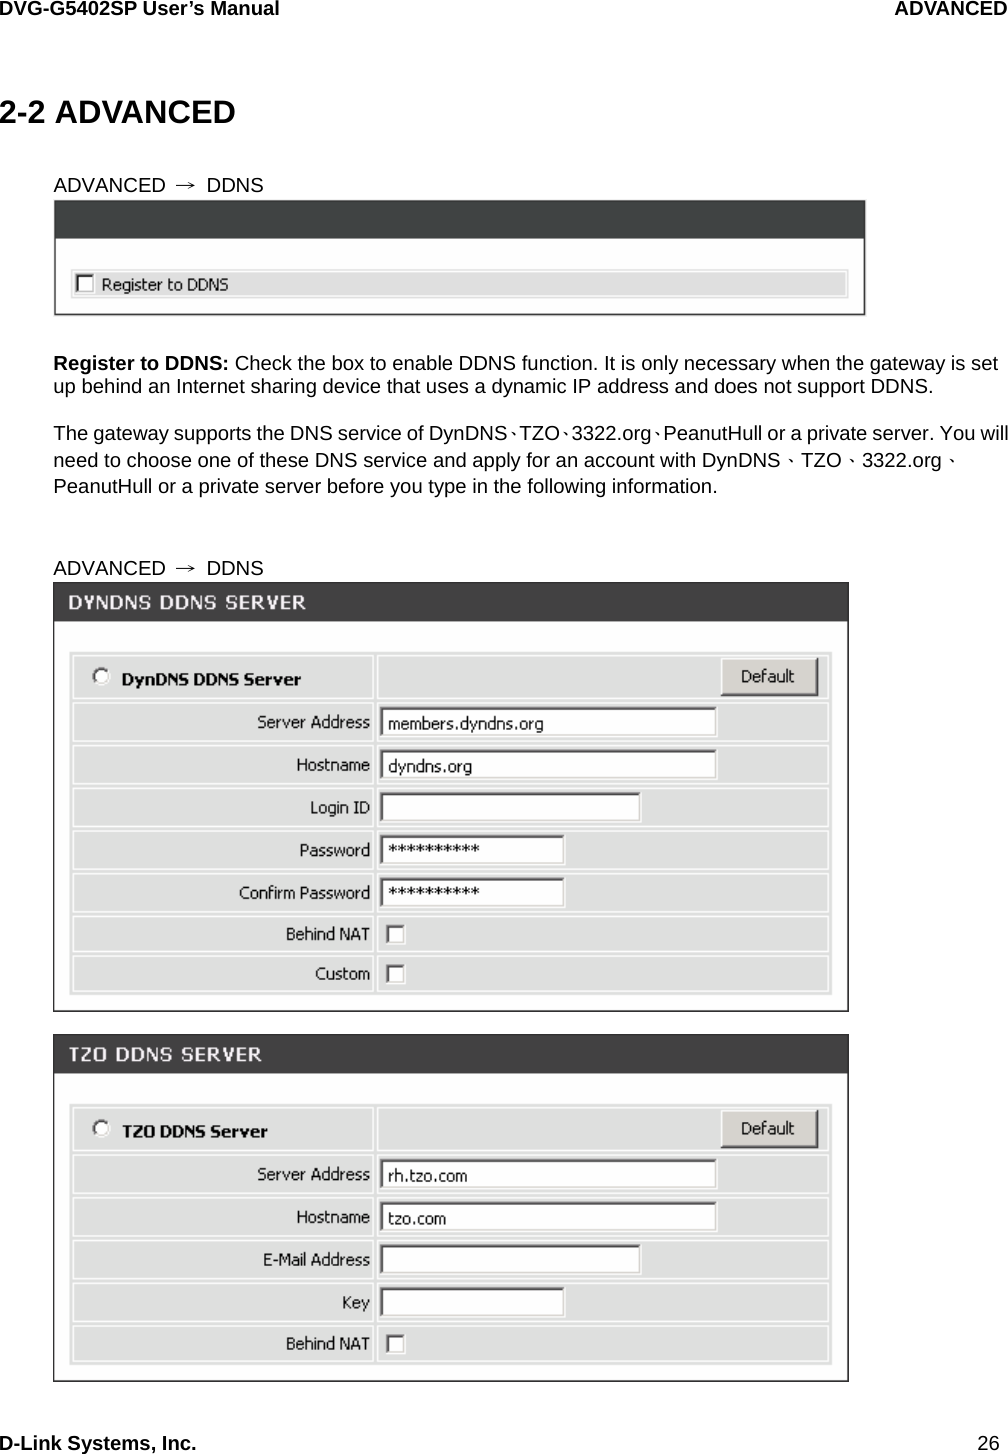 DVG-G5402SP User’s Manual                                   ADVANCED D-Link Systems, Inc.                                                                             26 2-2 ADVANCED  ADVANCED  → DDNS   Register to DDNS: Check the box to enable DDNS function. It is only necessary when the gateway is set up behind an Internet sharing device that uses a dynamic IP address and does not support DDNS.  The gateway supports the DNS service of DynDNS、TZO、3322.org、PeanutHull or a private server. You will need to choose one of these DNS service and apply for an account with DynDNS、TZO、3322.org、PeanutHull or a private server before you type in the following information.   ADVANCED  → DDNS    